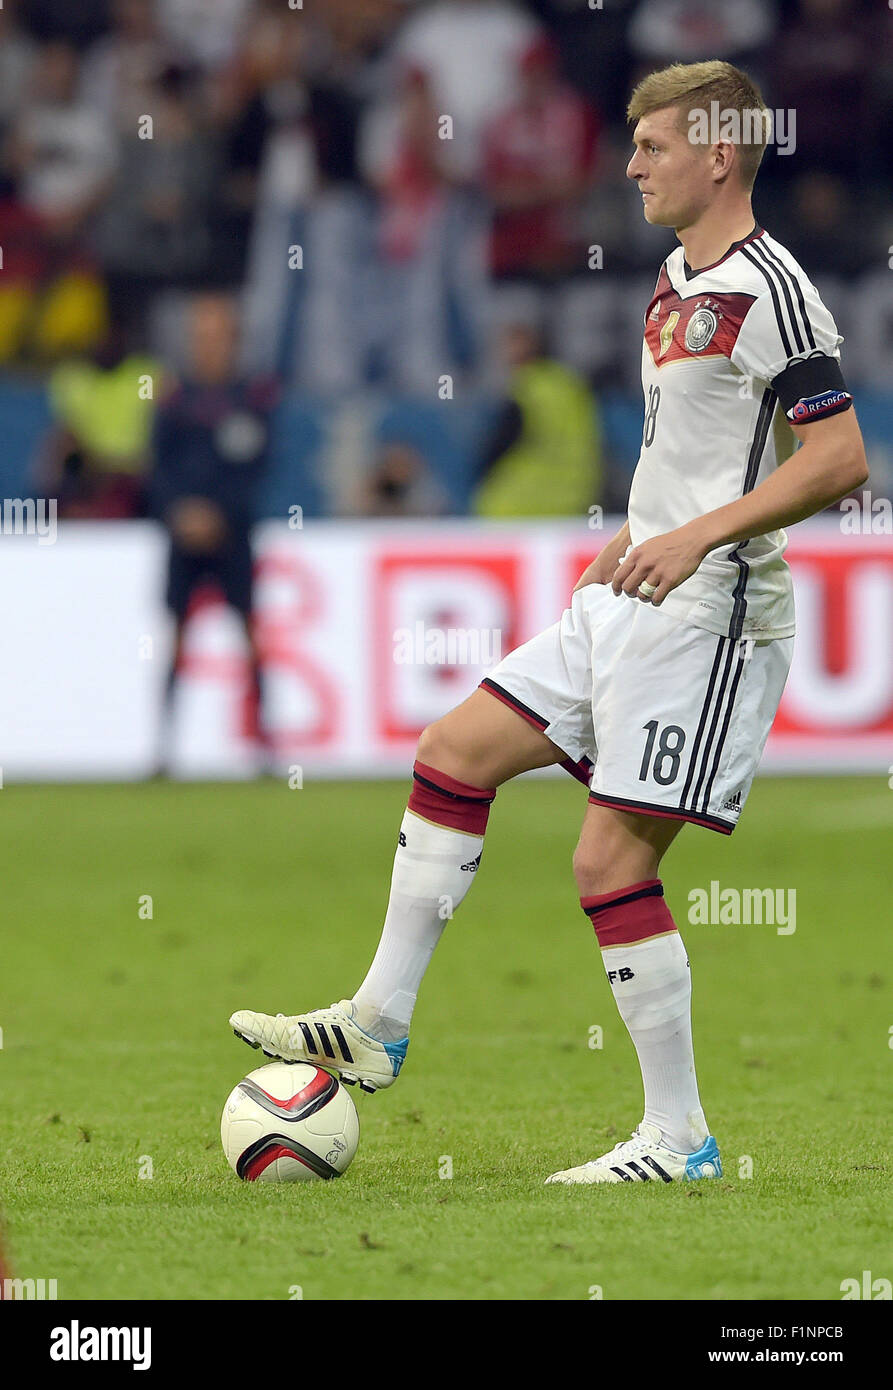 Germany's Toni Kroos in action during the Group D qualifier for the European Championships at the Commerzbank-Arena in Frankfurt am Main, Germany, 4 September 2015. PHOTO: FEDERICO GAMBARINI/DPA Stock Photo